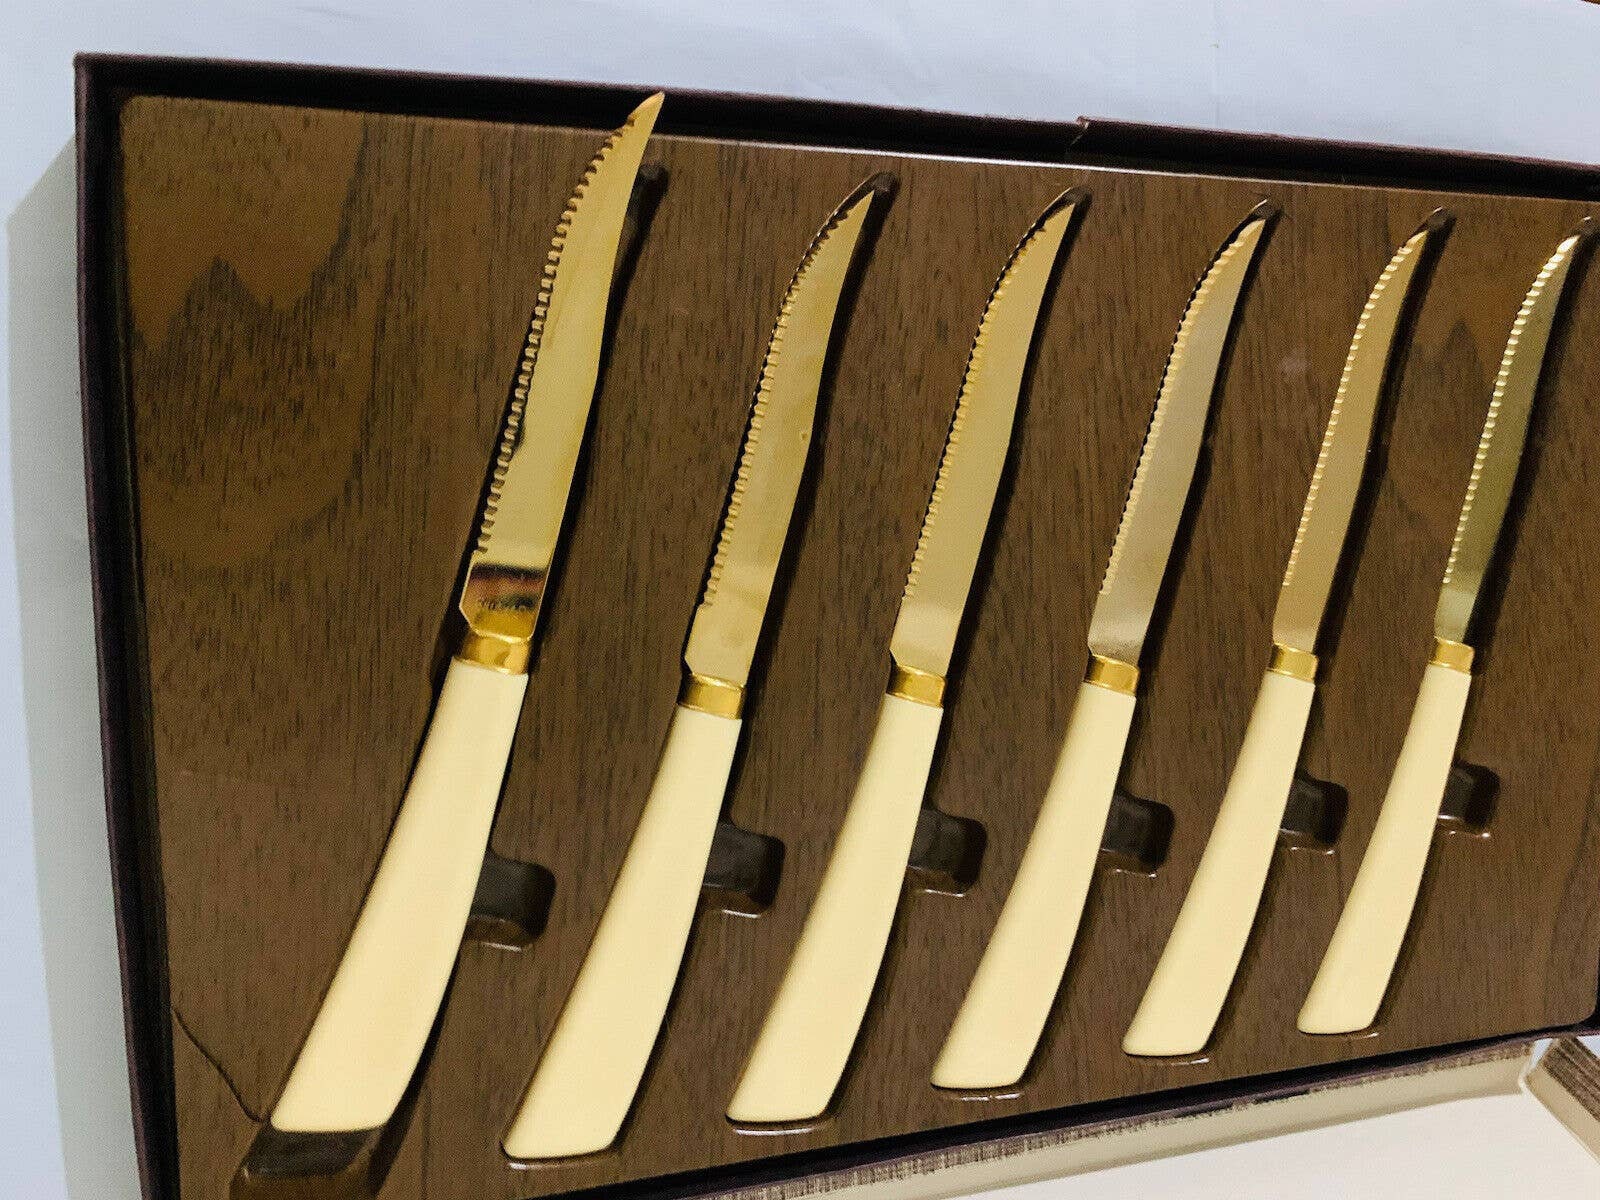 Quicut Steak Knife Set, Promotional Gift From KIRBY 